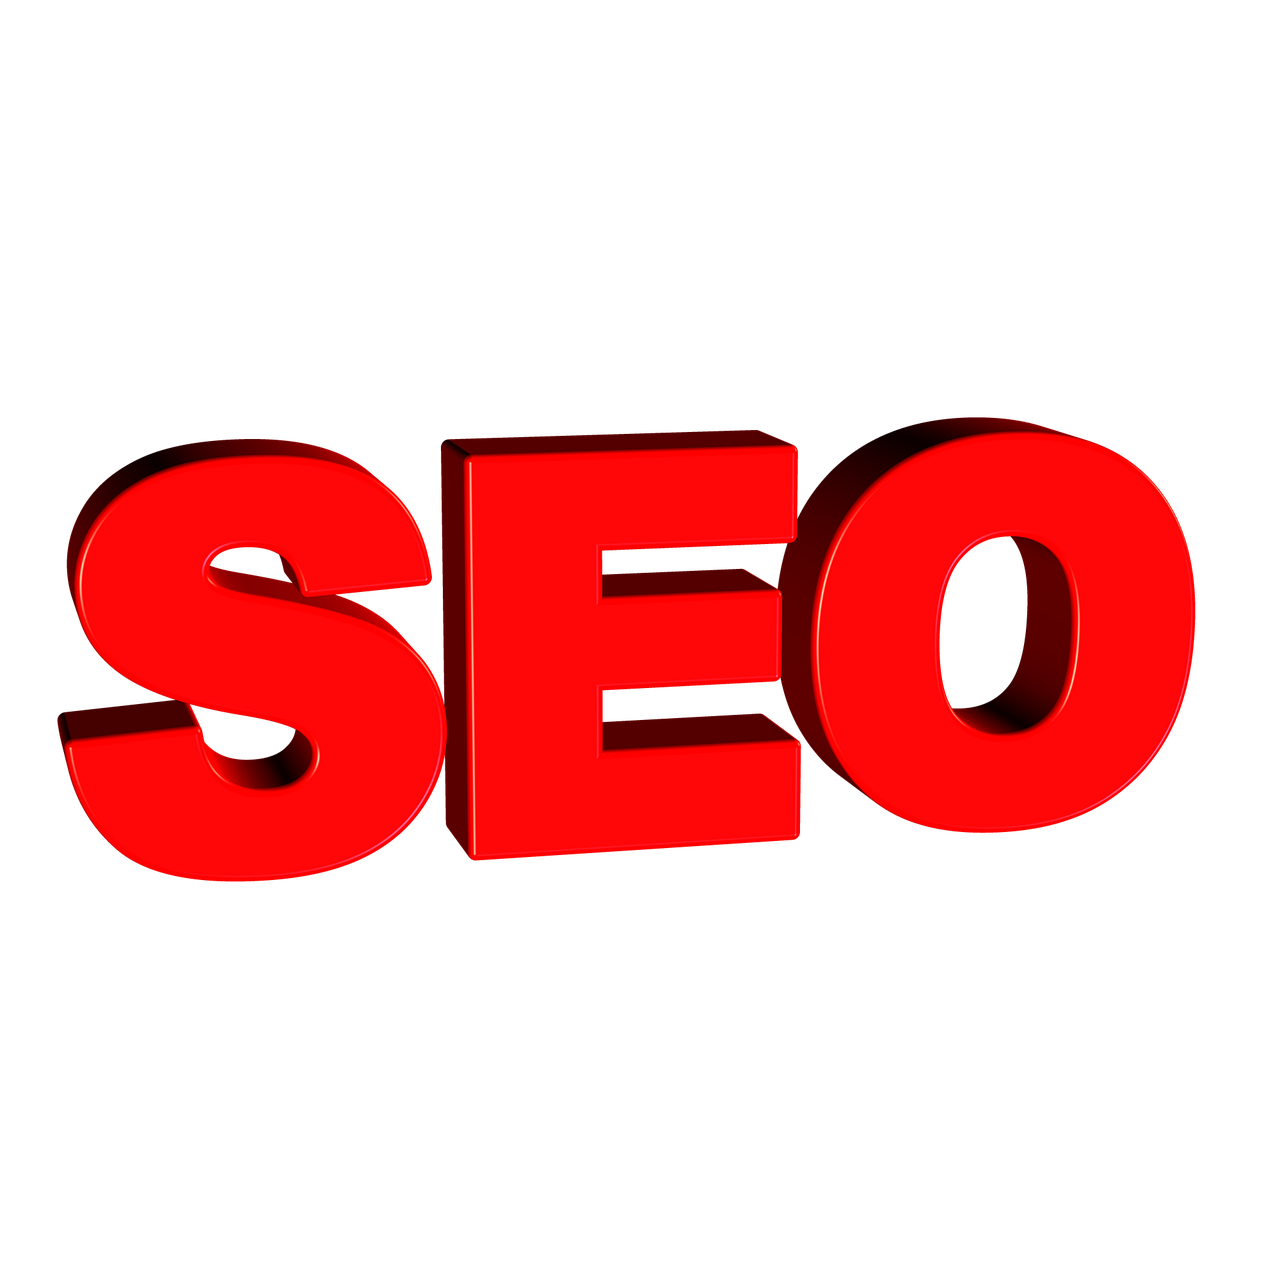 a red seo word on a black background, for hire 3d artist, avatar for website, albuquerque, you can see in the picture